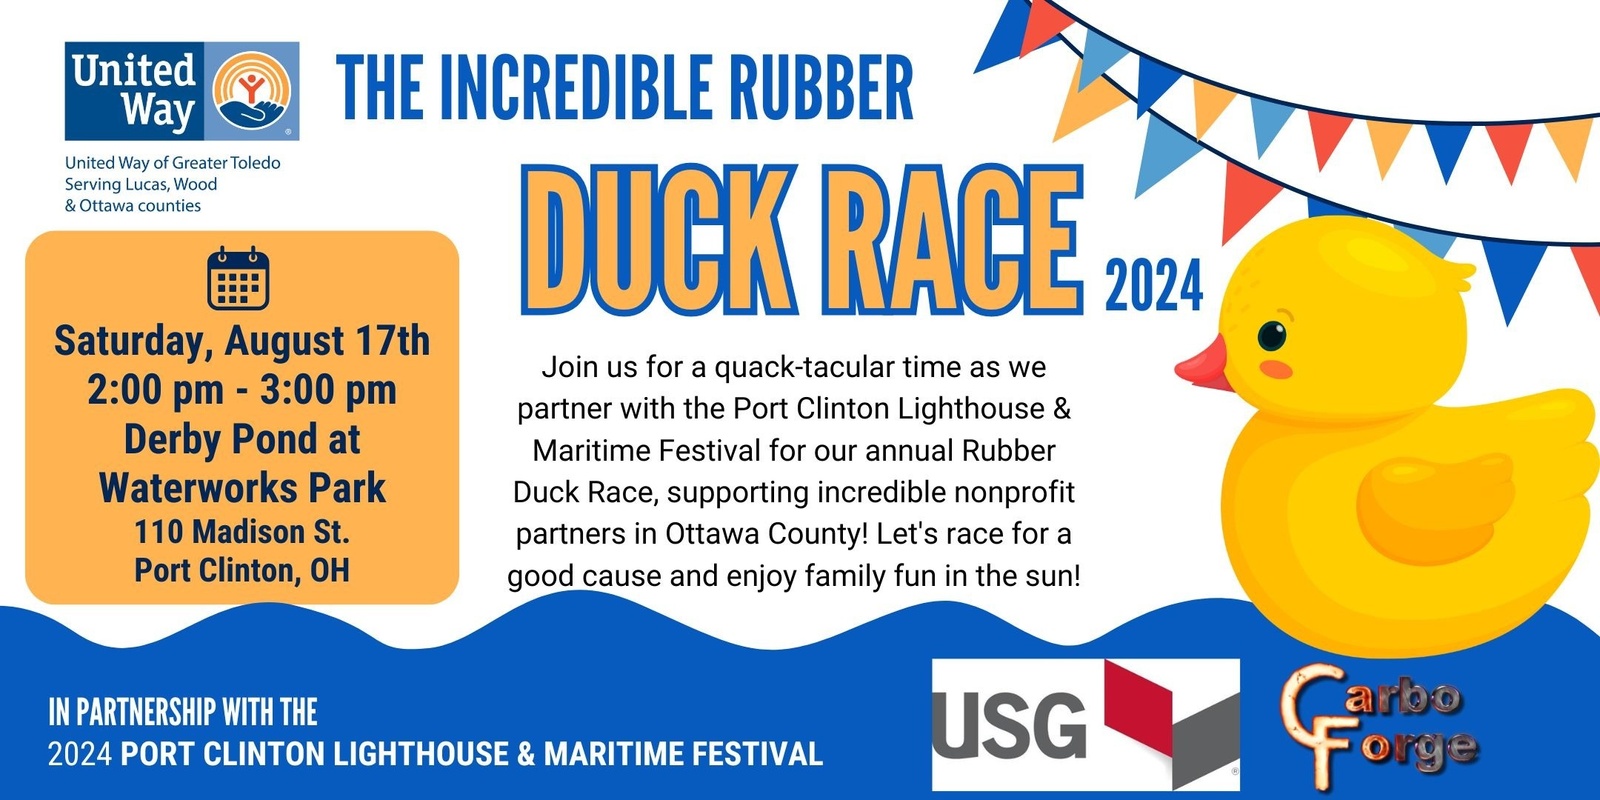 Banner image for The Incredible Rubber Duck Race 2024